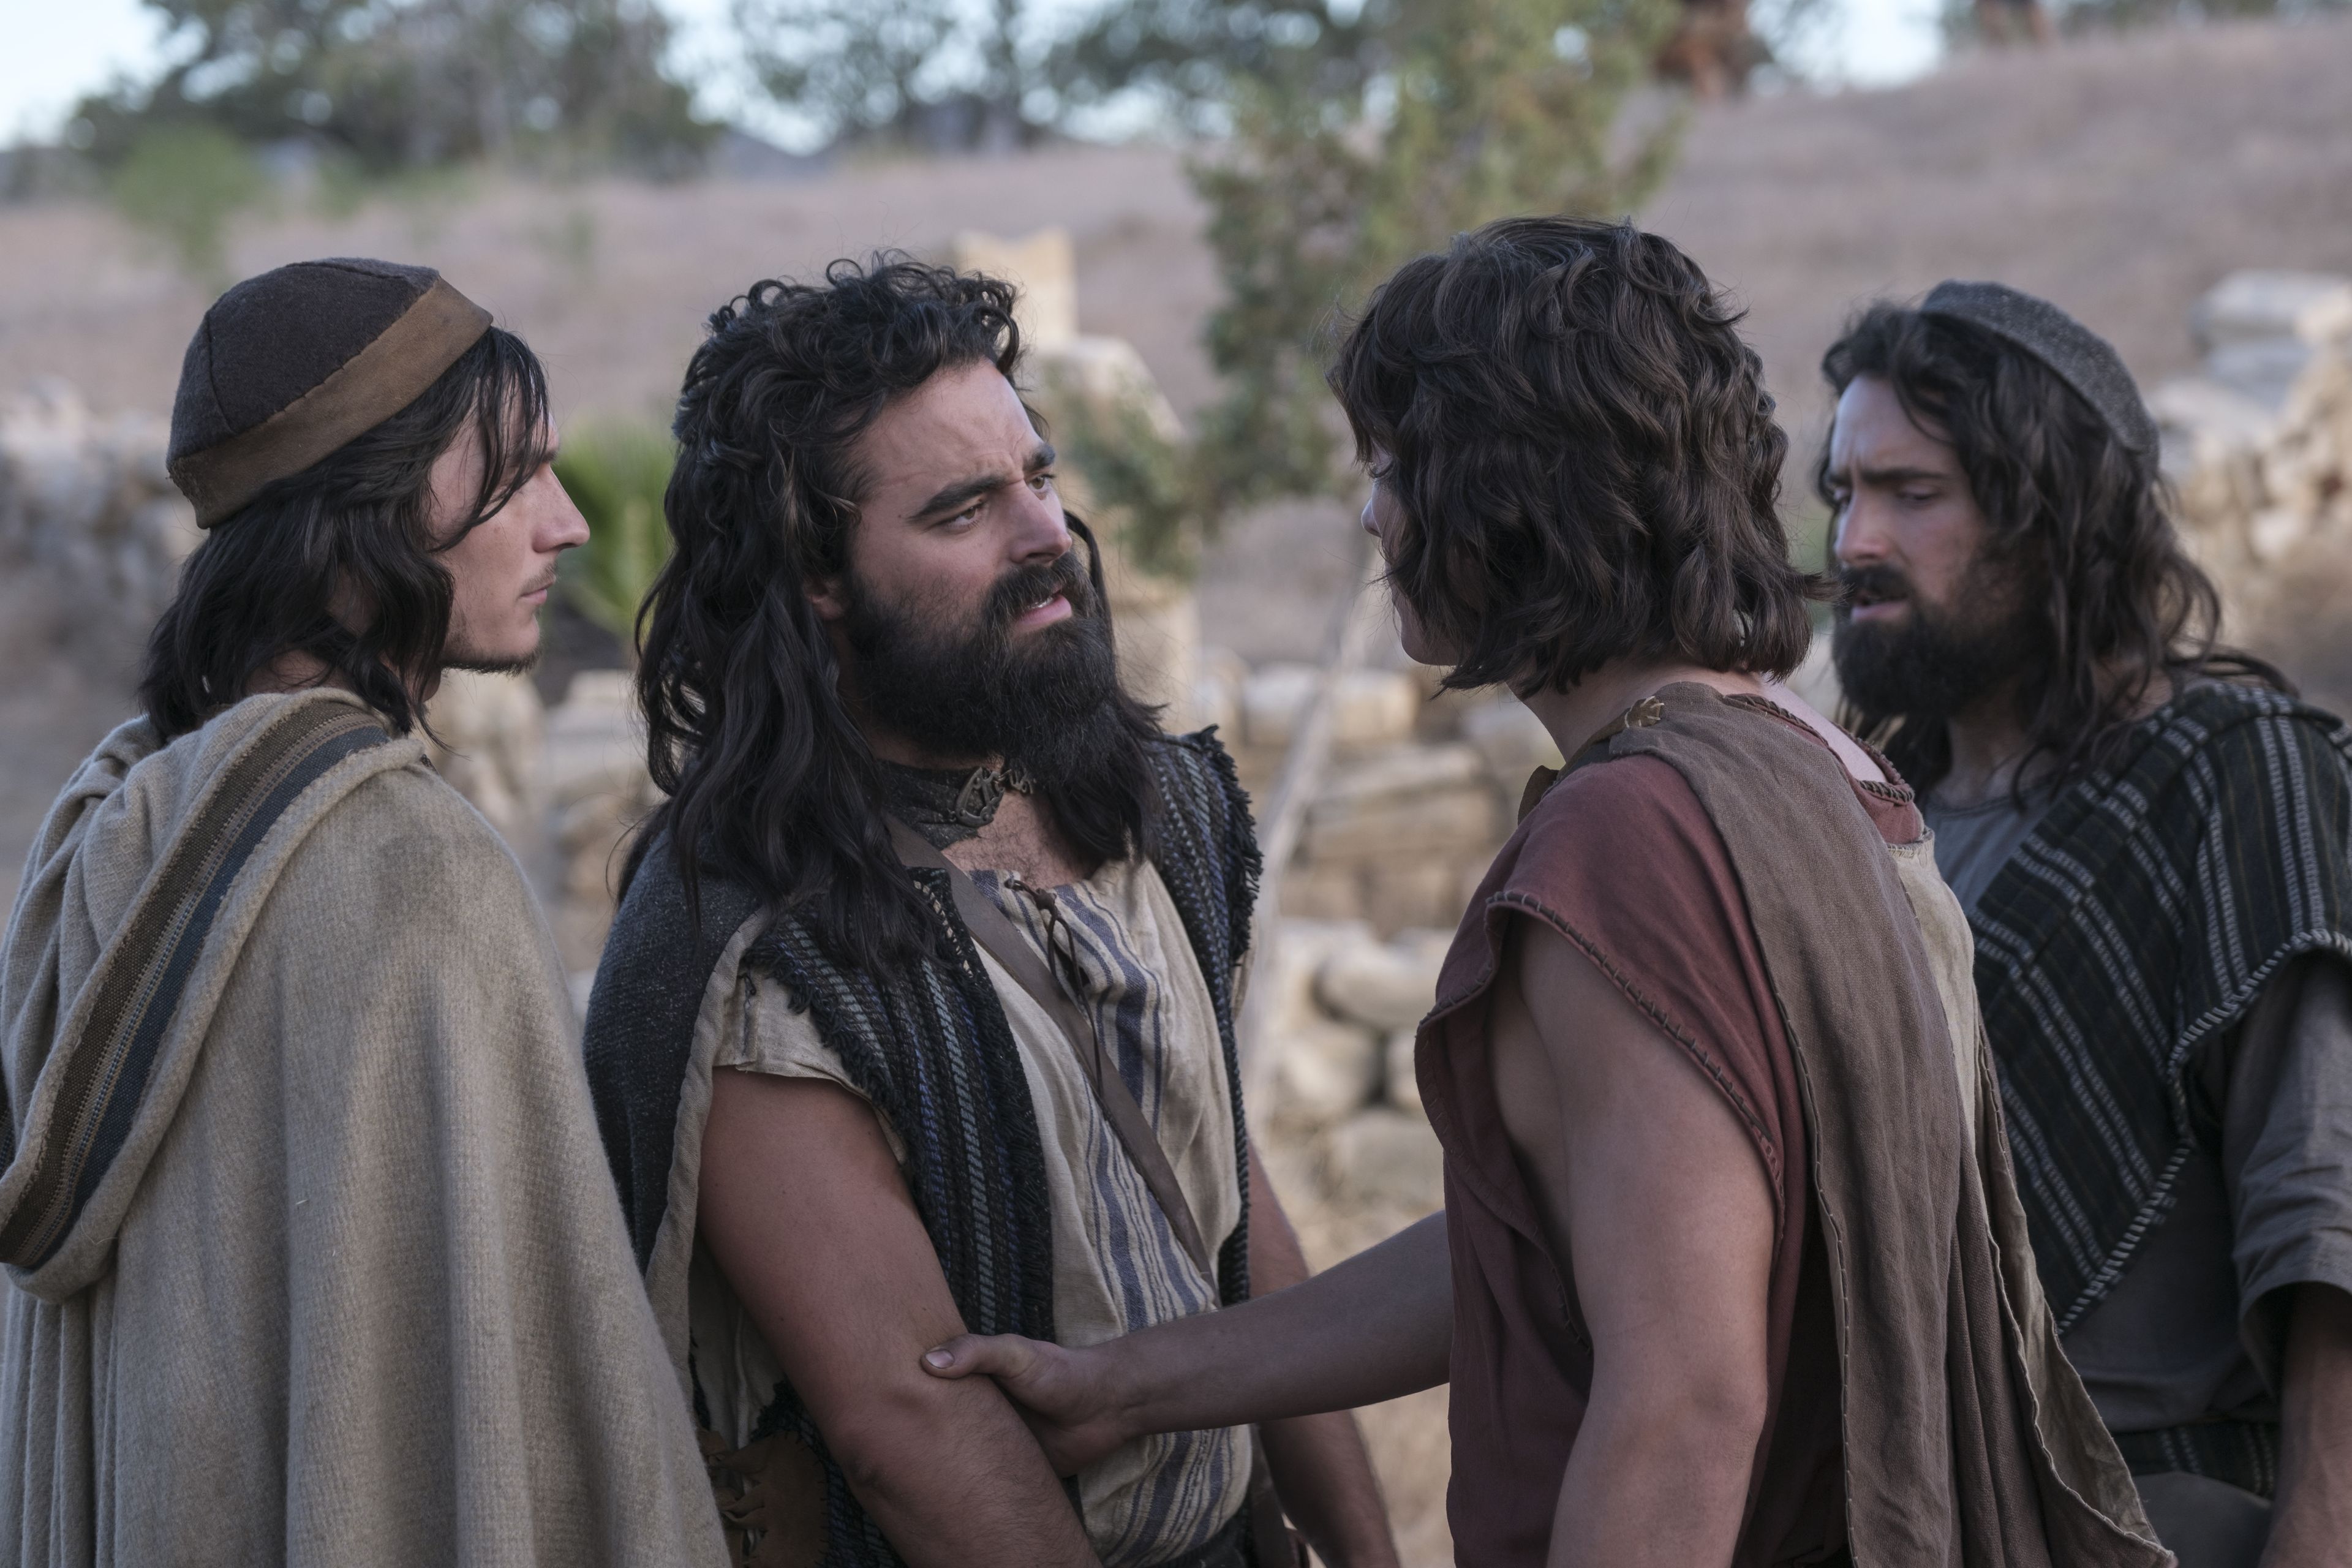 Nephi and his brothers discuss how to approach Laban.